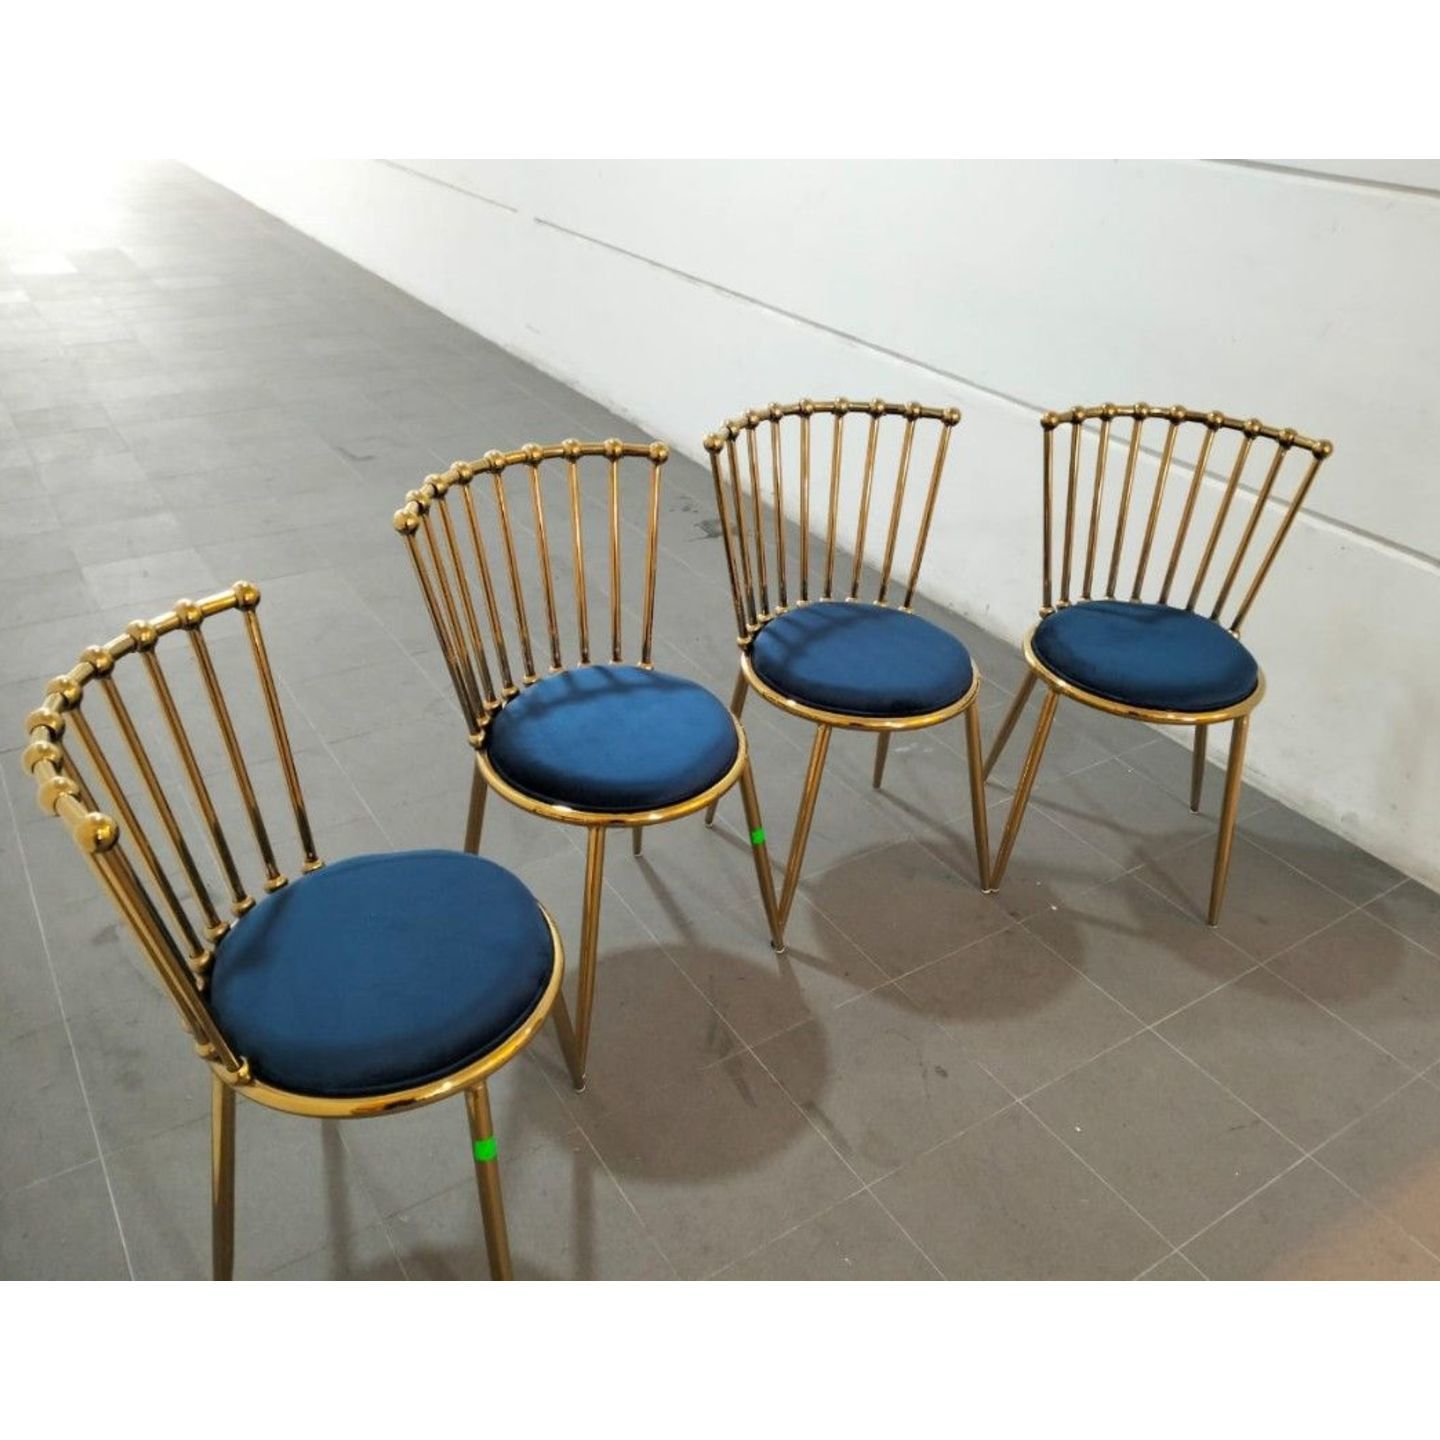 FIRE SALE - 4pcs UTORIA Chairs in GOLD Frame with Blue Velvet Cushion